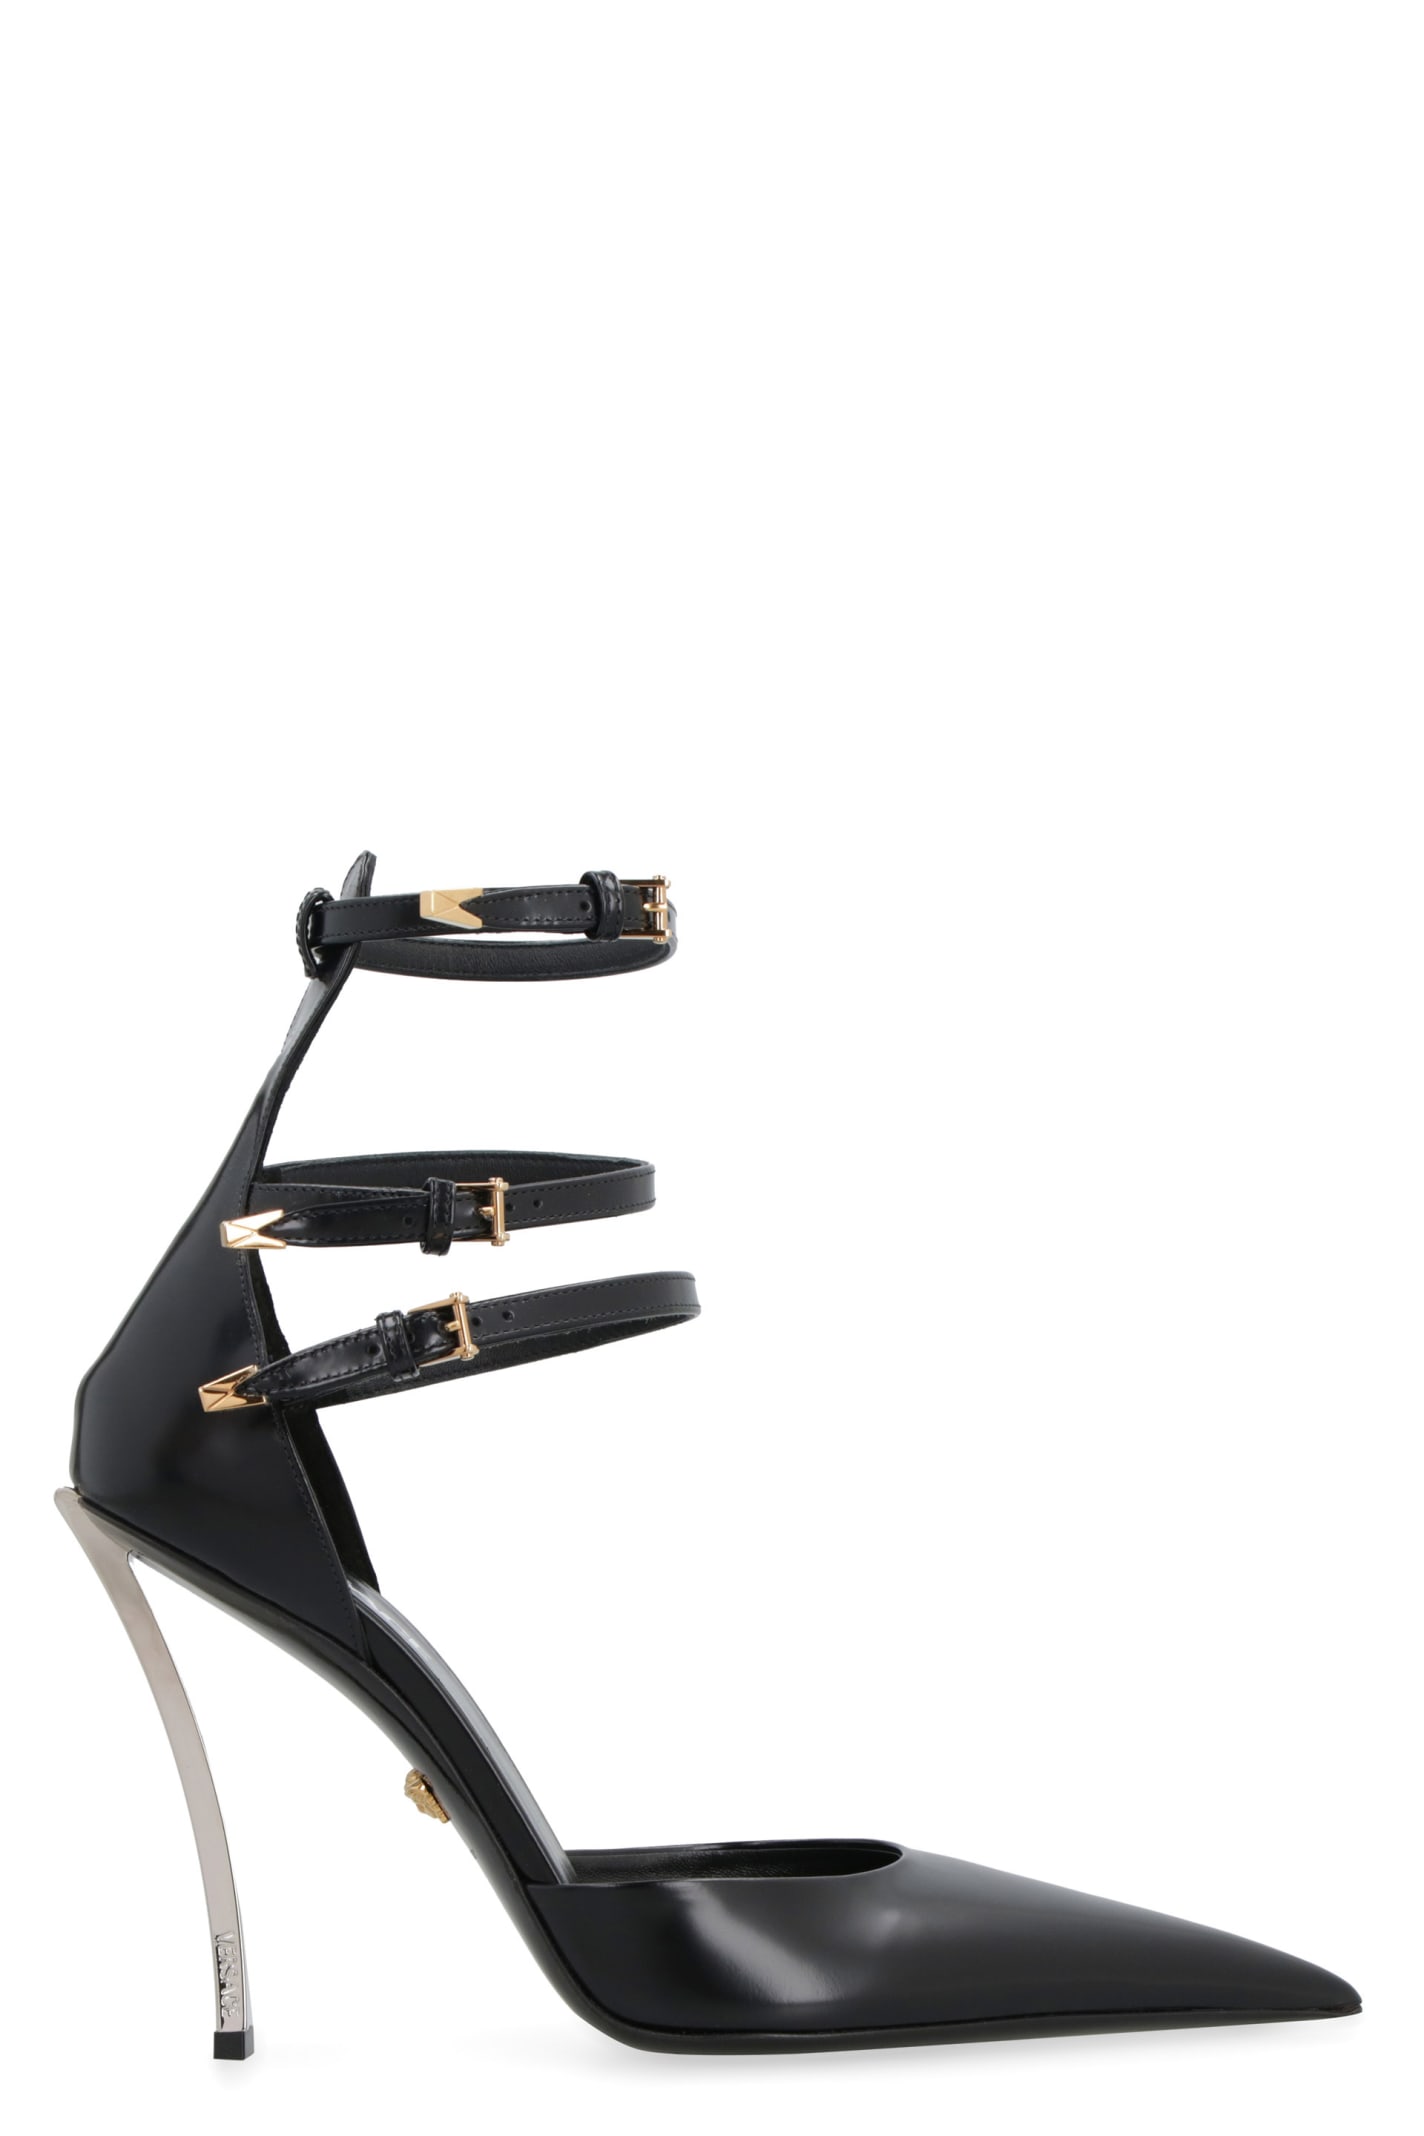 VERSACE LEATHER POINTY-TOE PUMPS